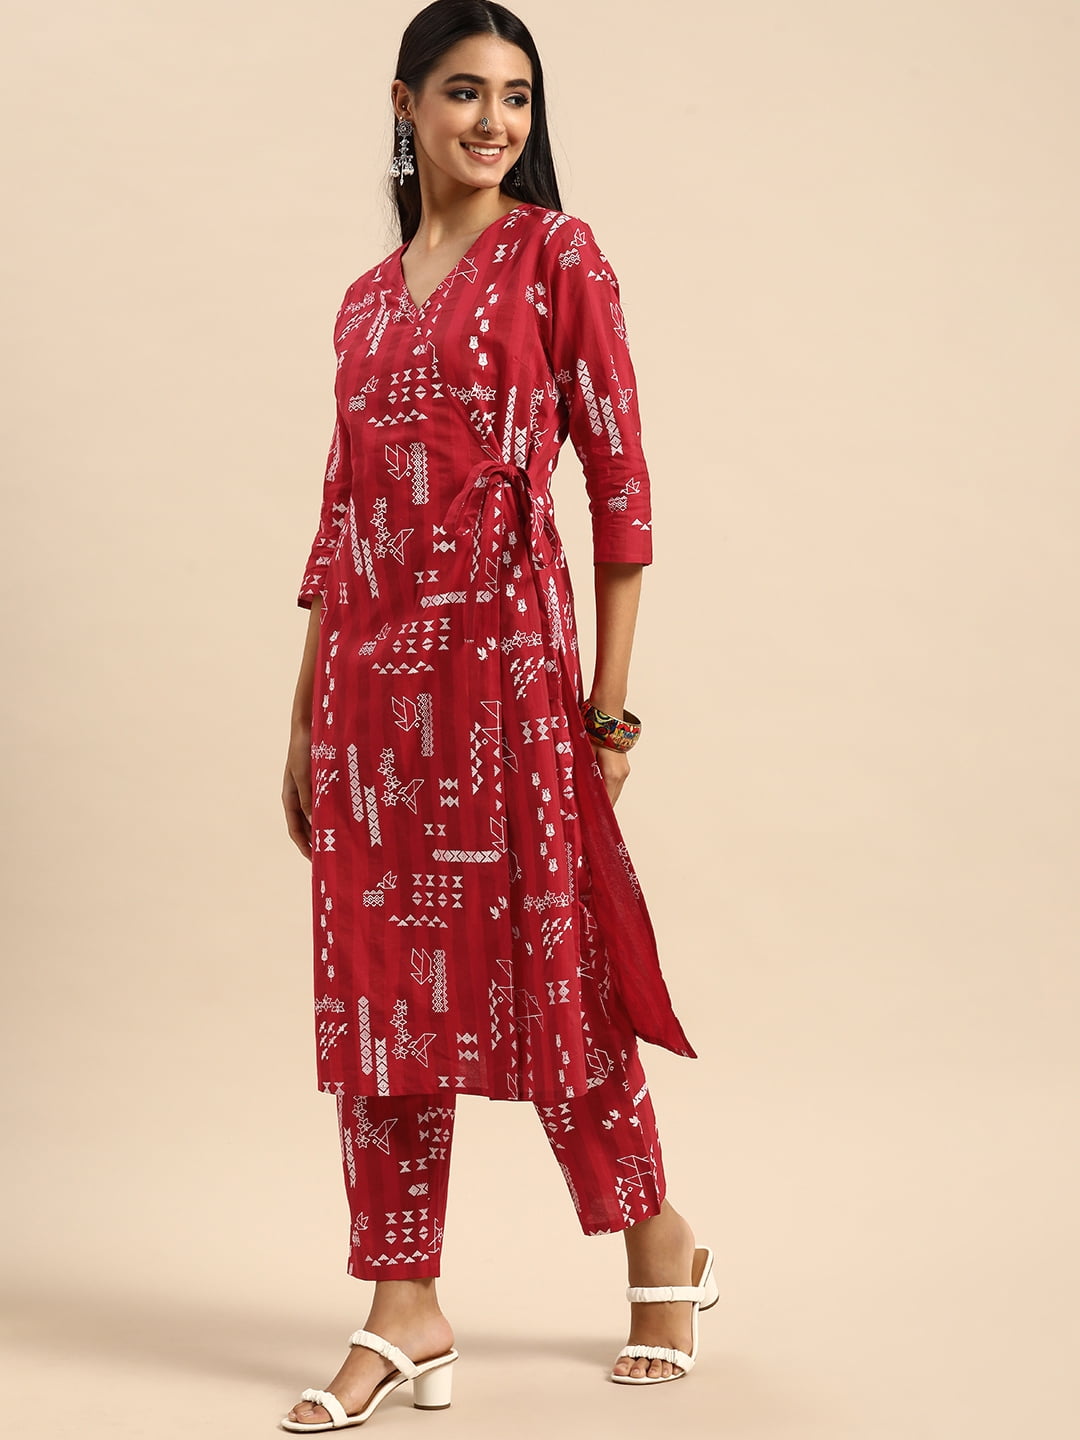 Floral Print Cotton Cambric Kurti, Gentle Wash, Size: M To Xxl (38 To 44)  at Rs 620/piece in Jaipur